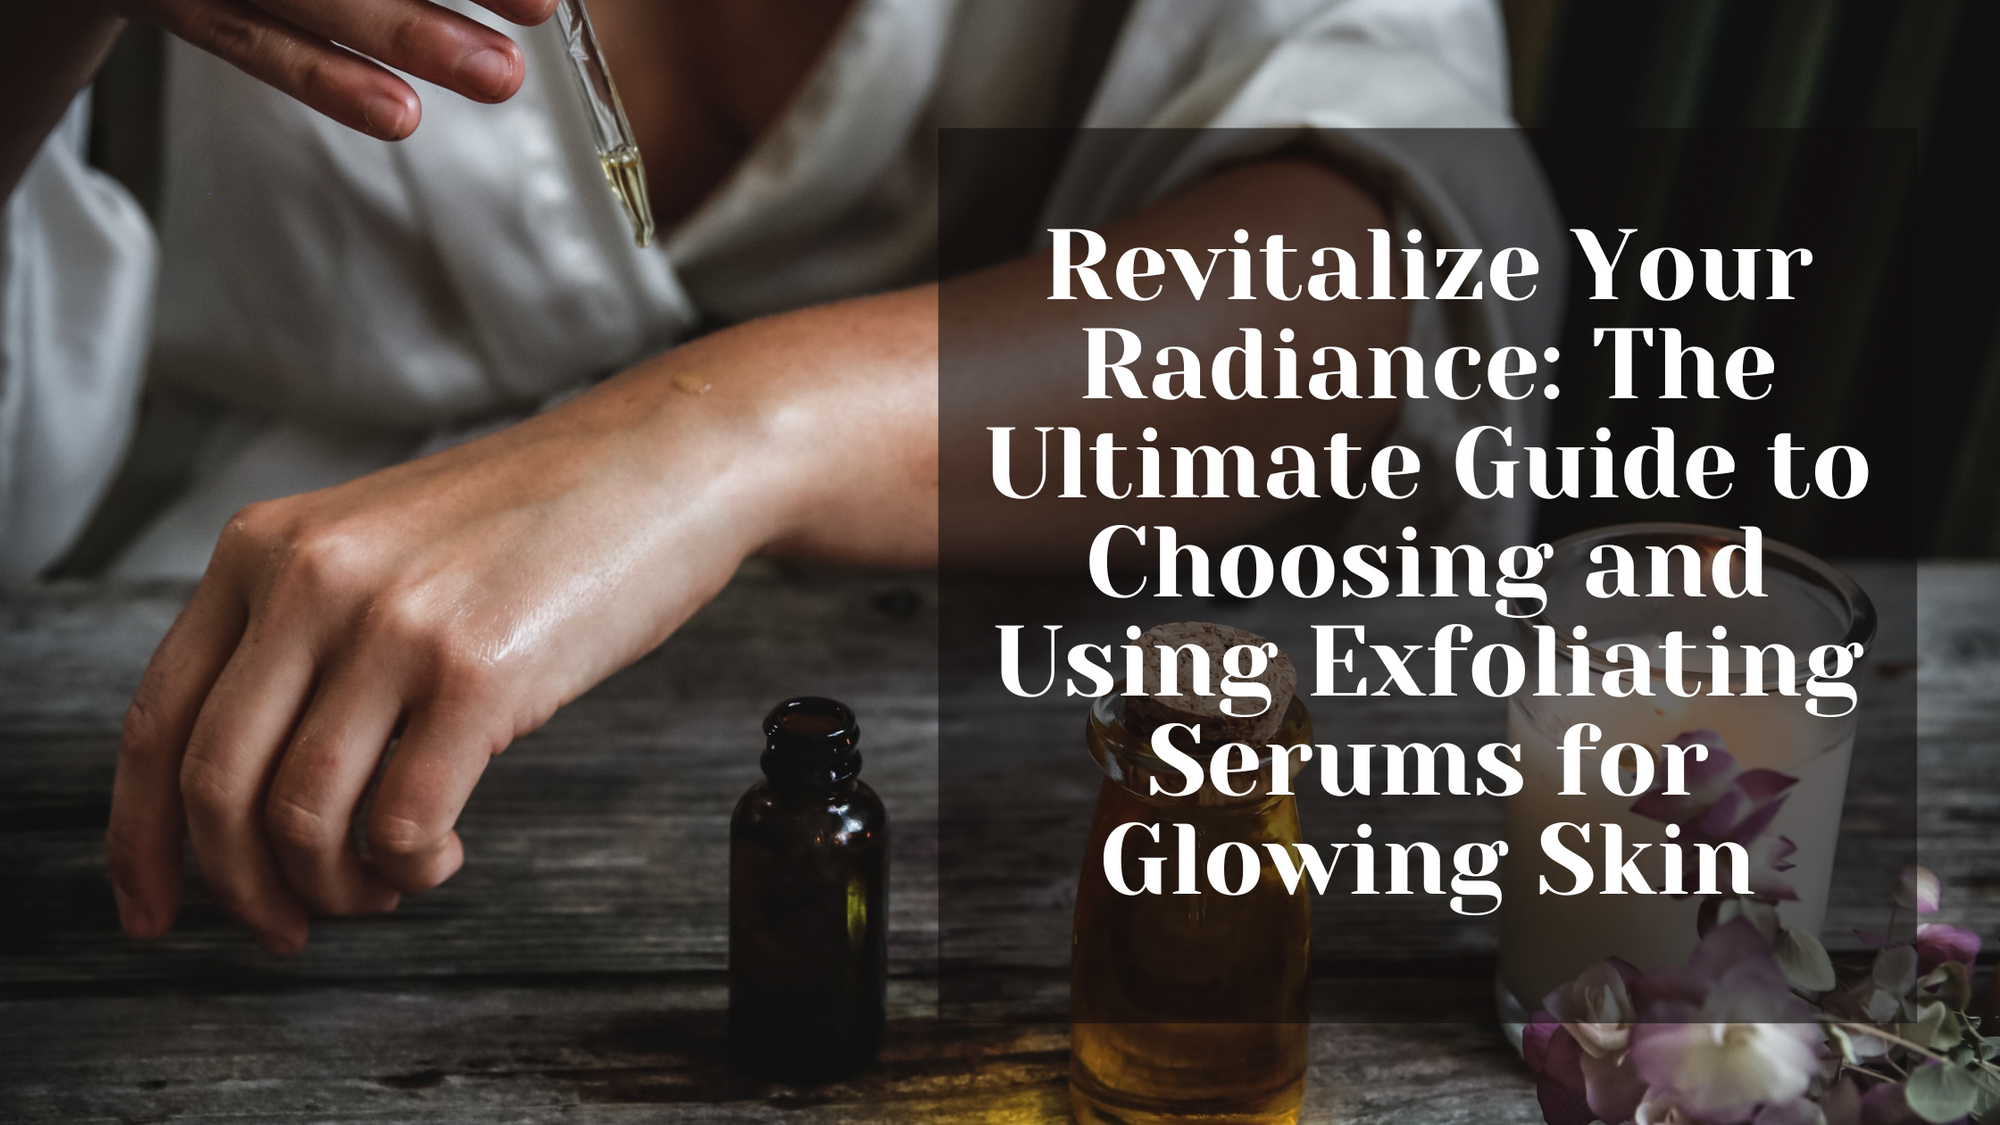 Revitalize Your Radiance: The Ultimate Guide to Choosing and Using Exfoliating Serums for Glowing Skin